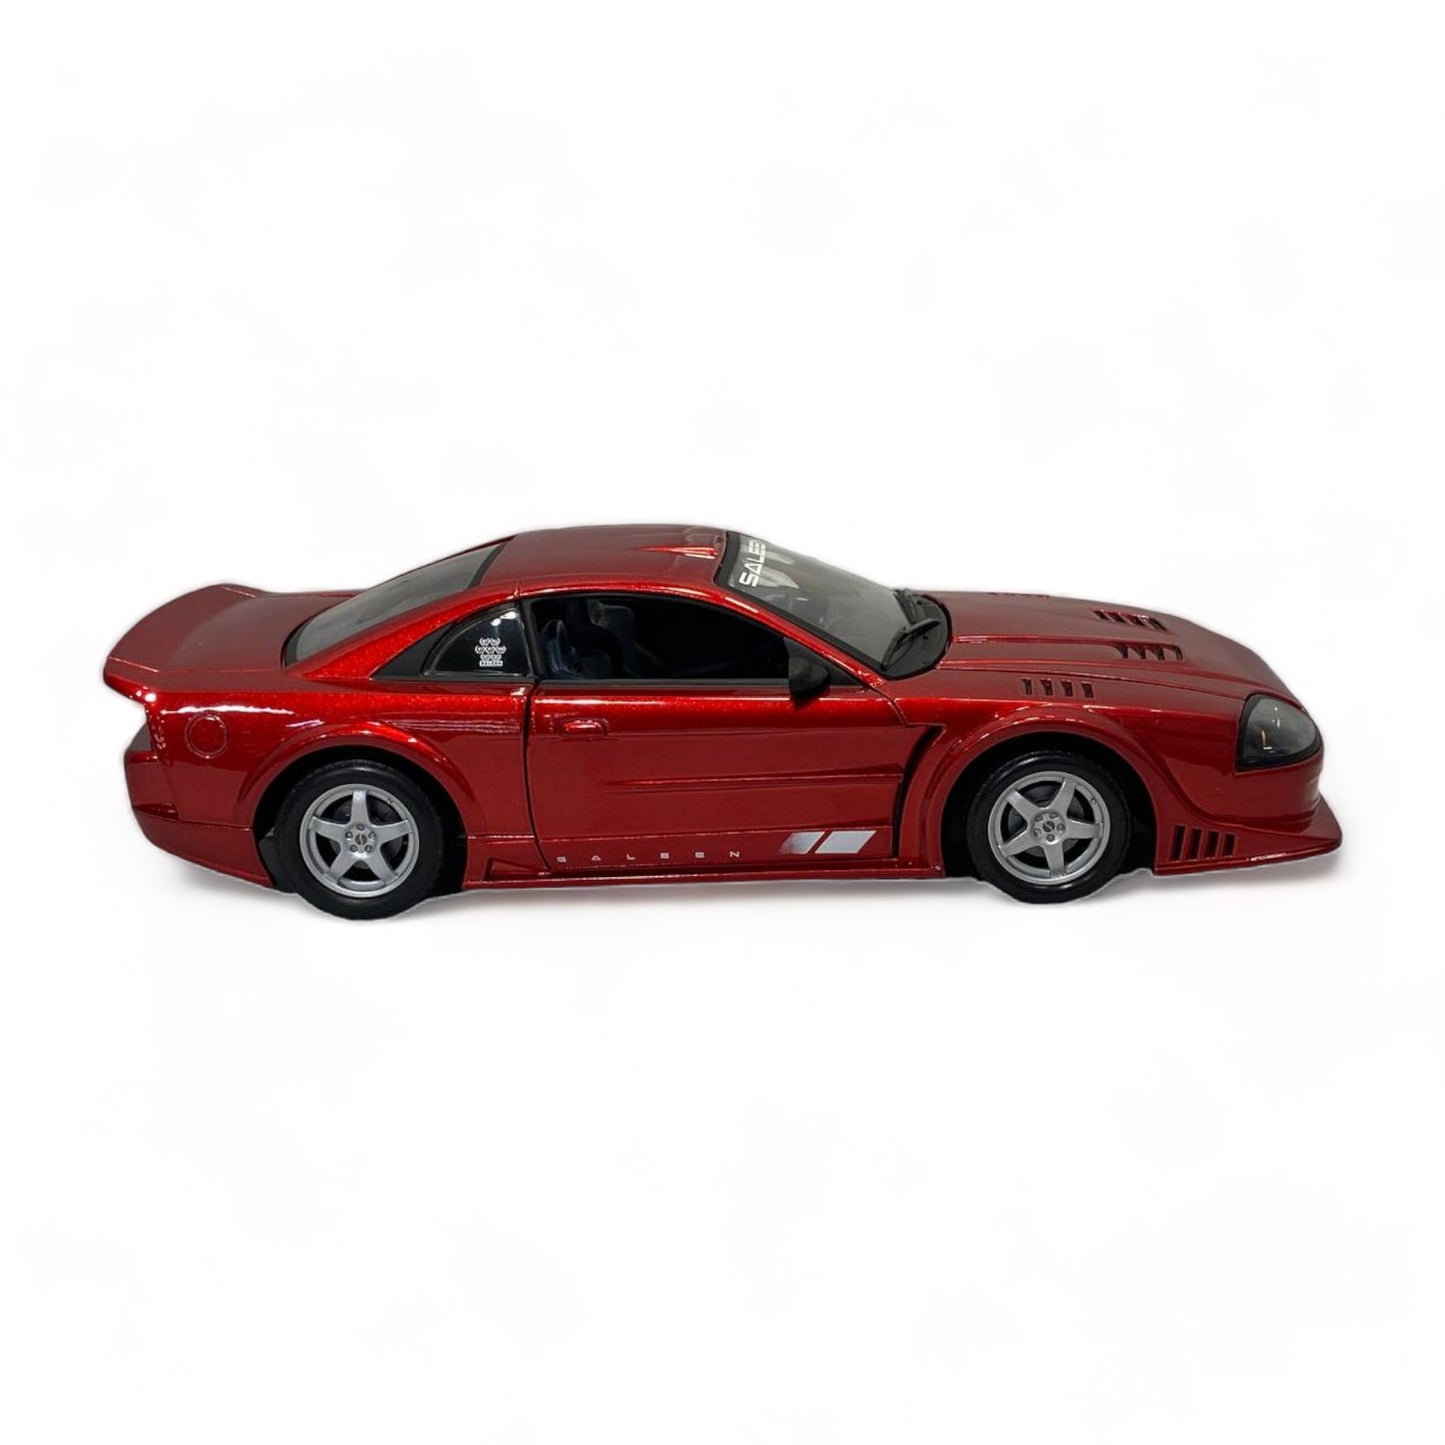 Motor Max Ford SALEEN SR RED 1/18